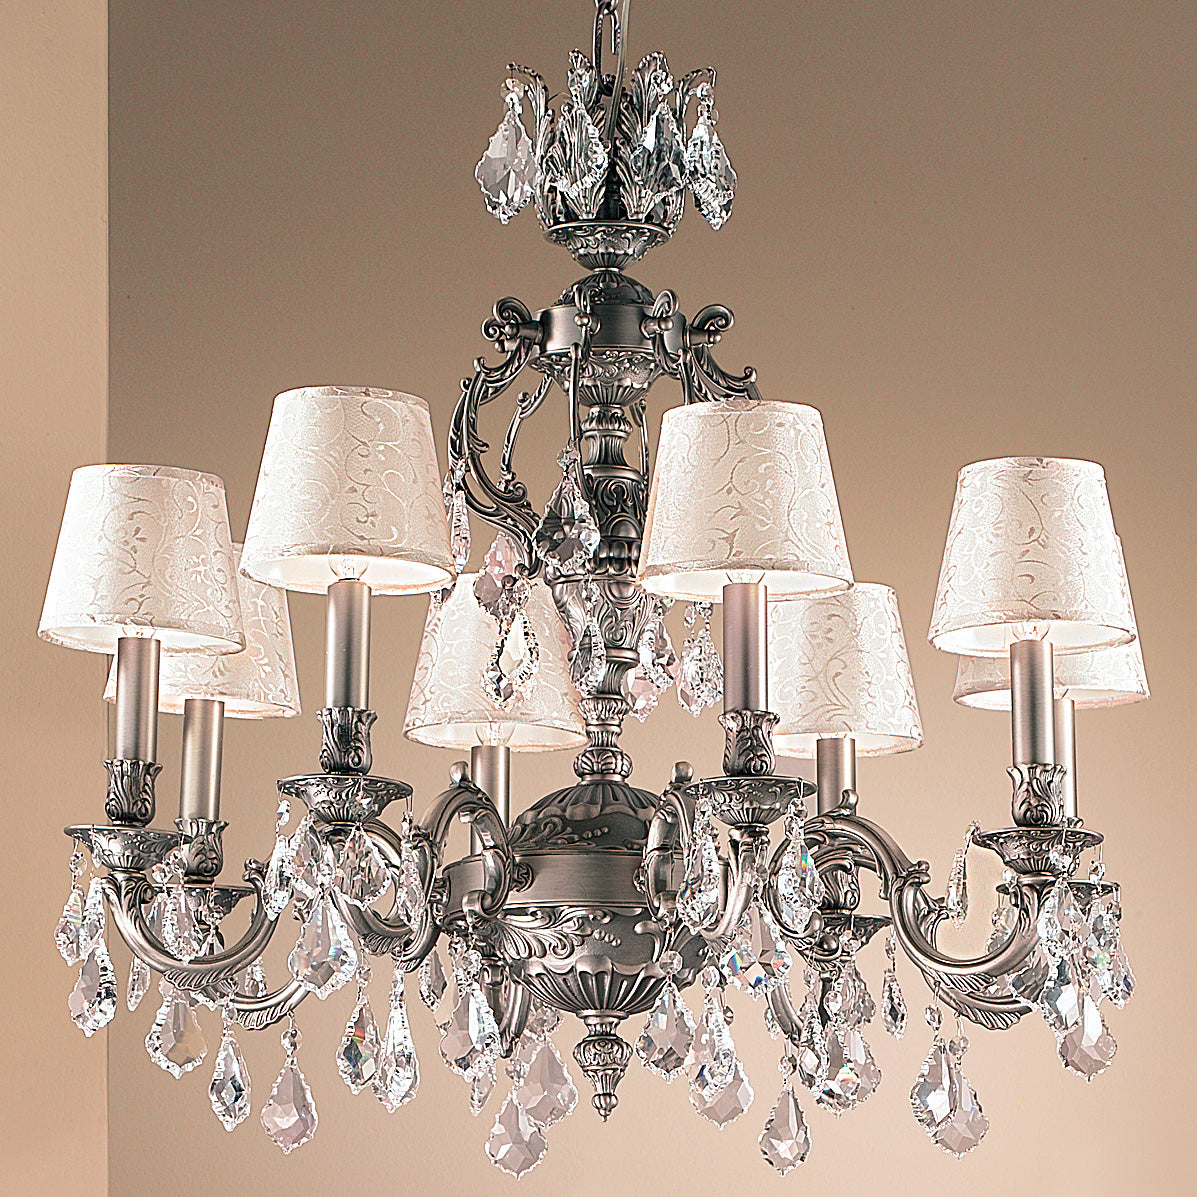 Classic Lighting 57378 FG SC Chateau Crystal Chandelier in French Gold (Imported from Spain)